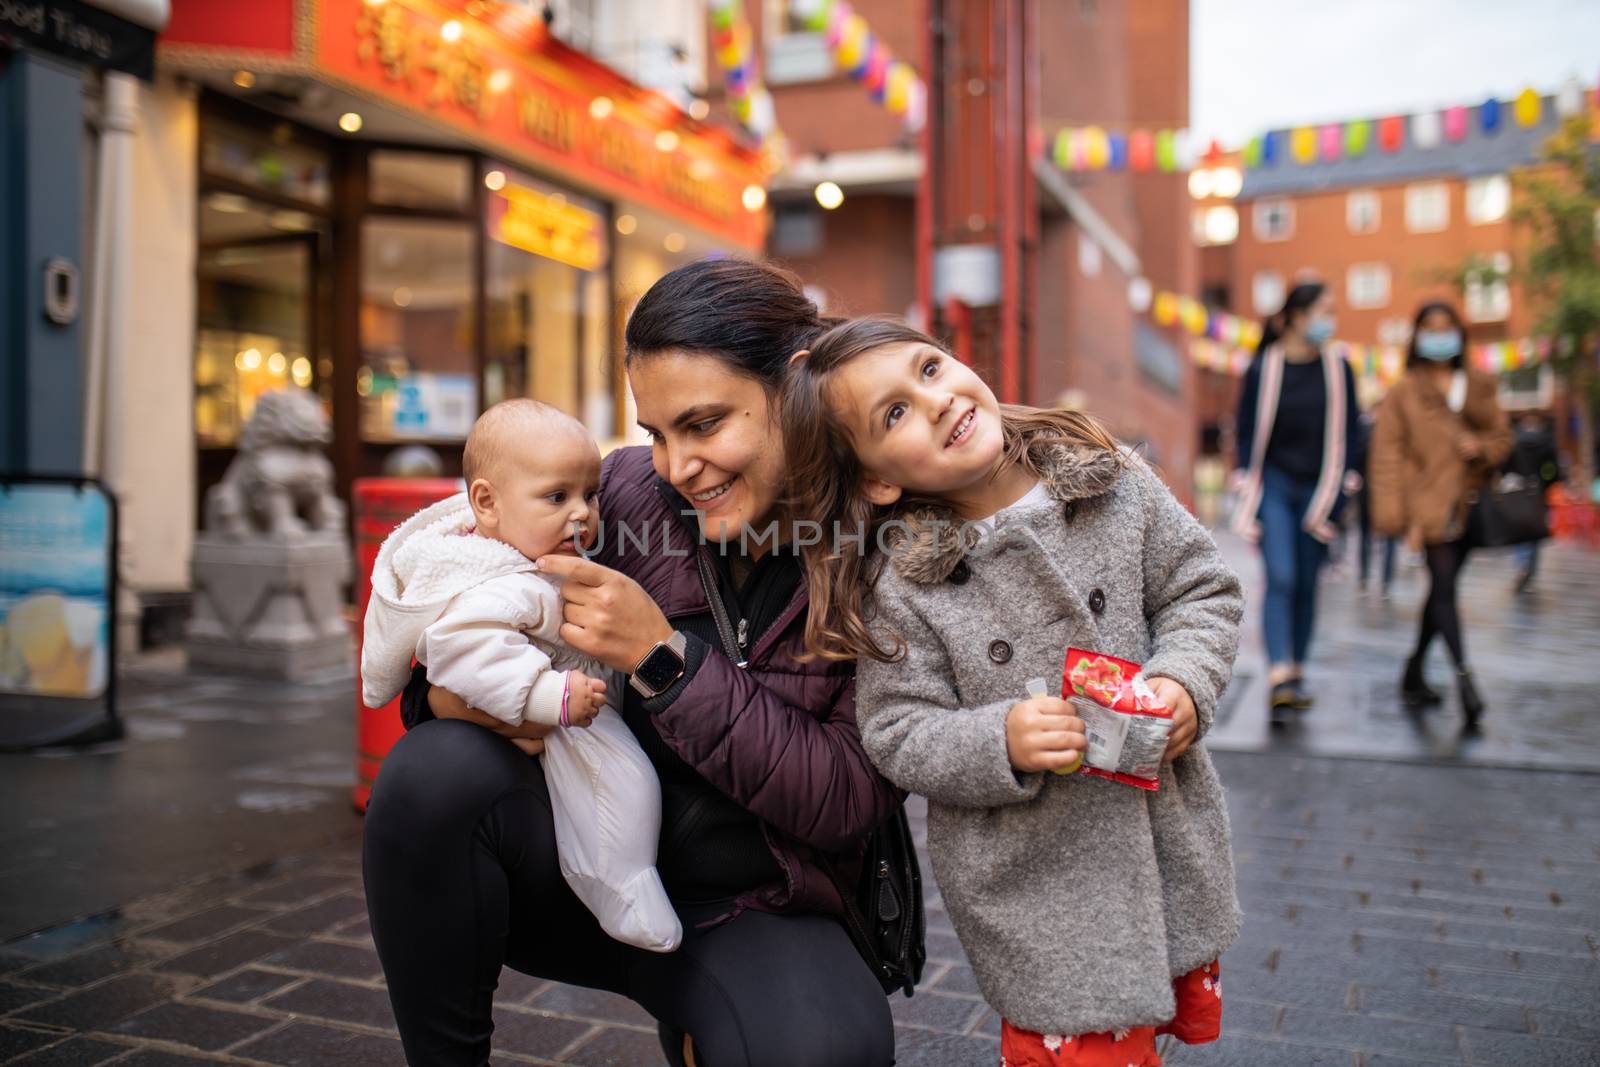 Picture of a smiling little girl resting her head on the shoulder of her mother who is kneeling and holding her baby daughter, with a blurry alley from Chinatown and people walking as the background